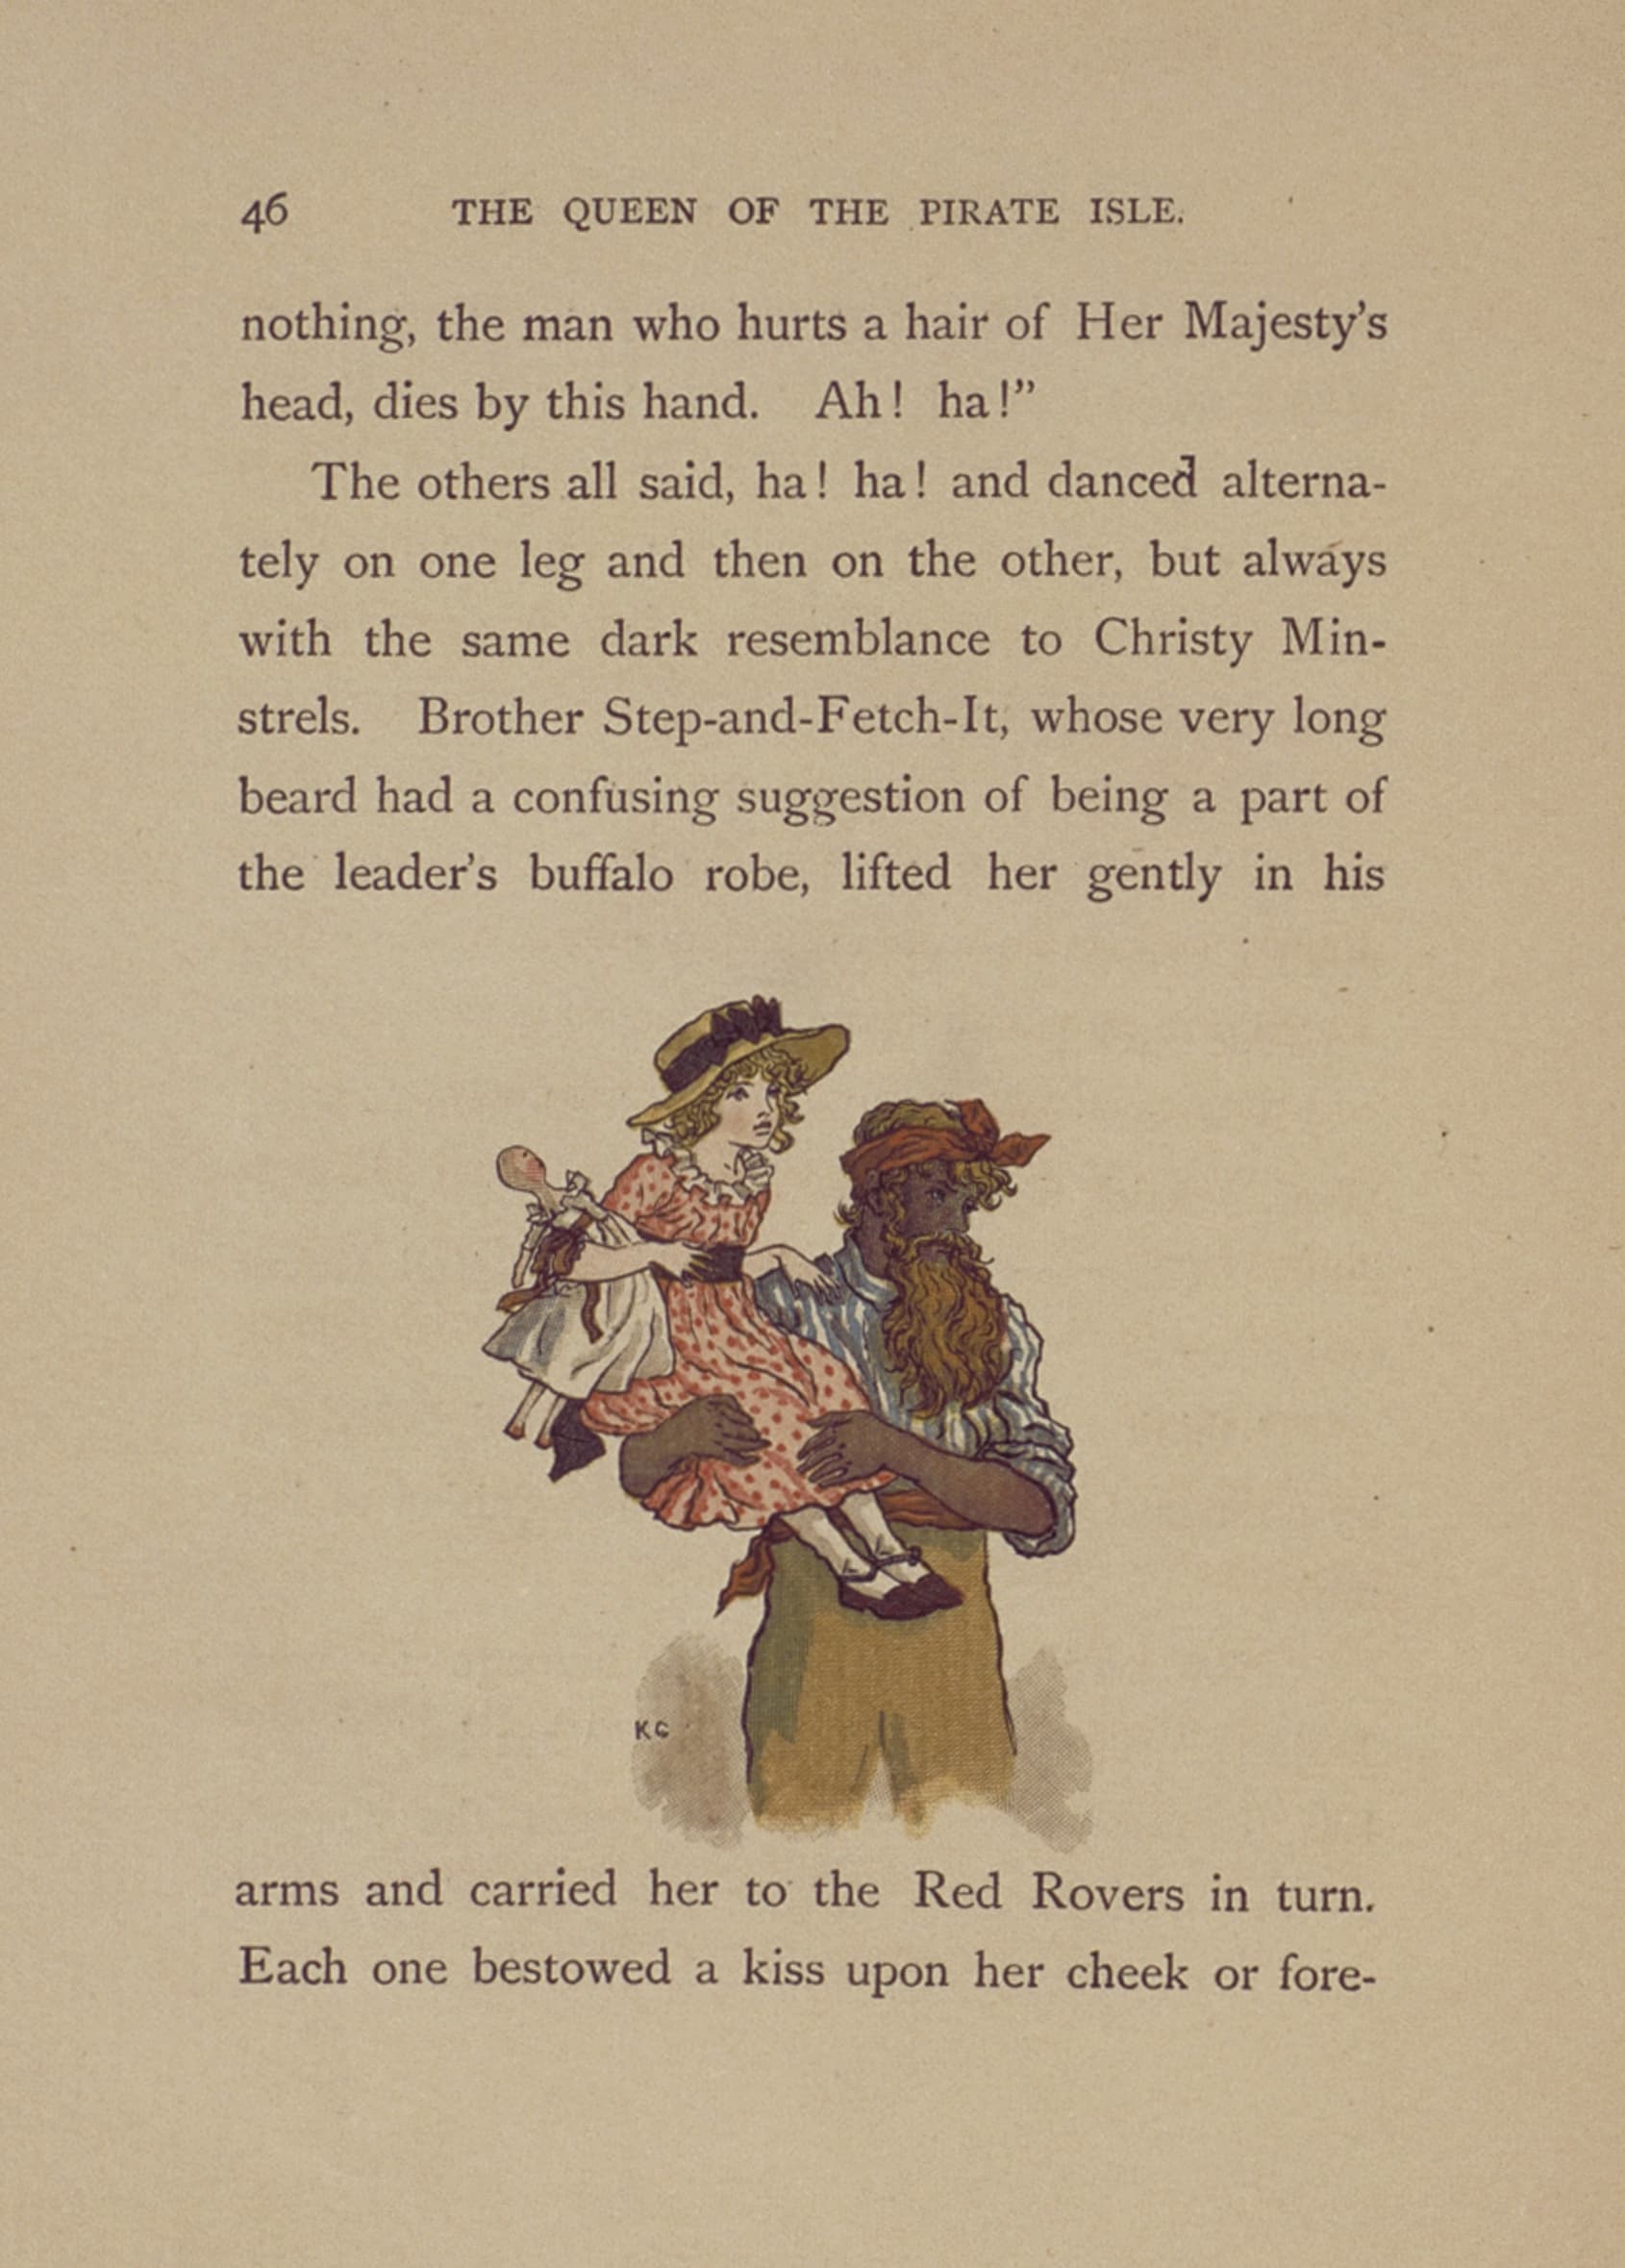 Illustration 2 from “The Queen of the Pirate Isle”